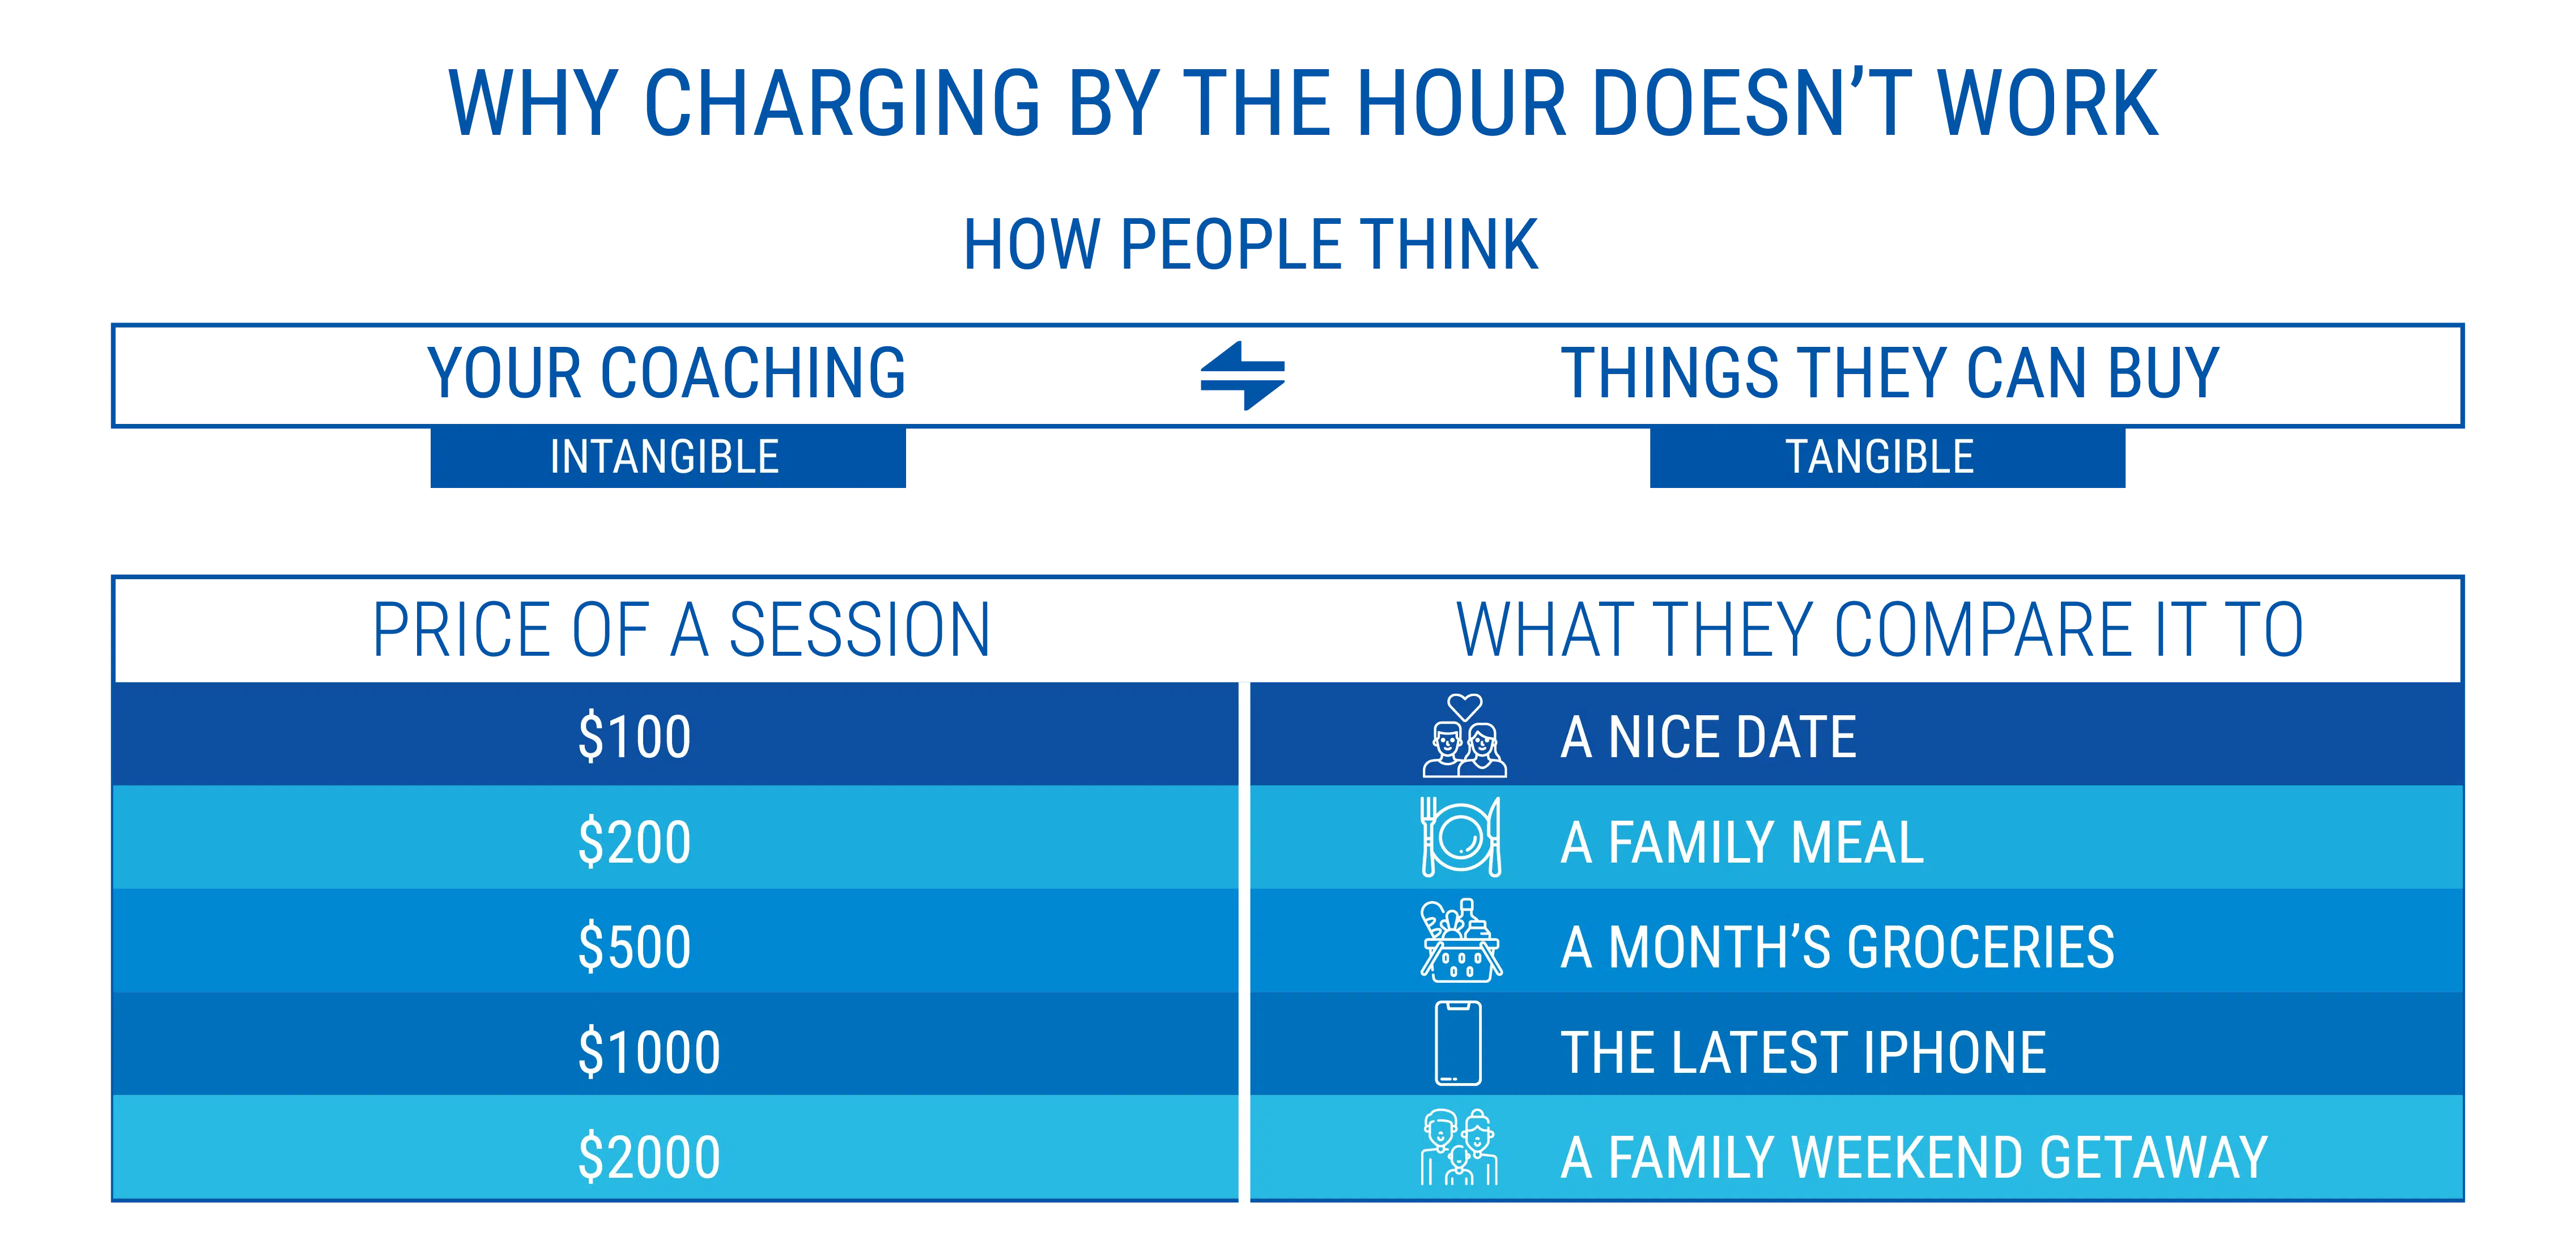 why charging by the hour doesn't work - starting a coaching business while working full-time